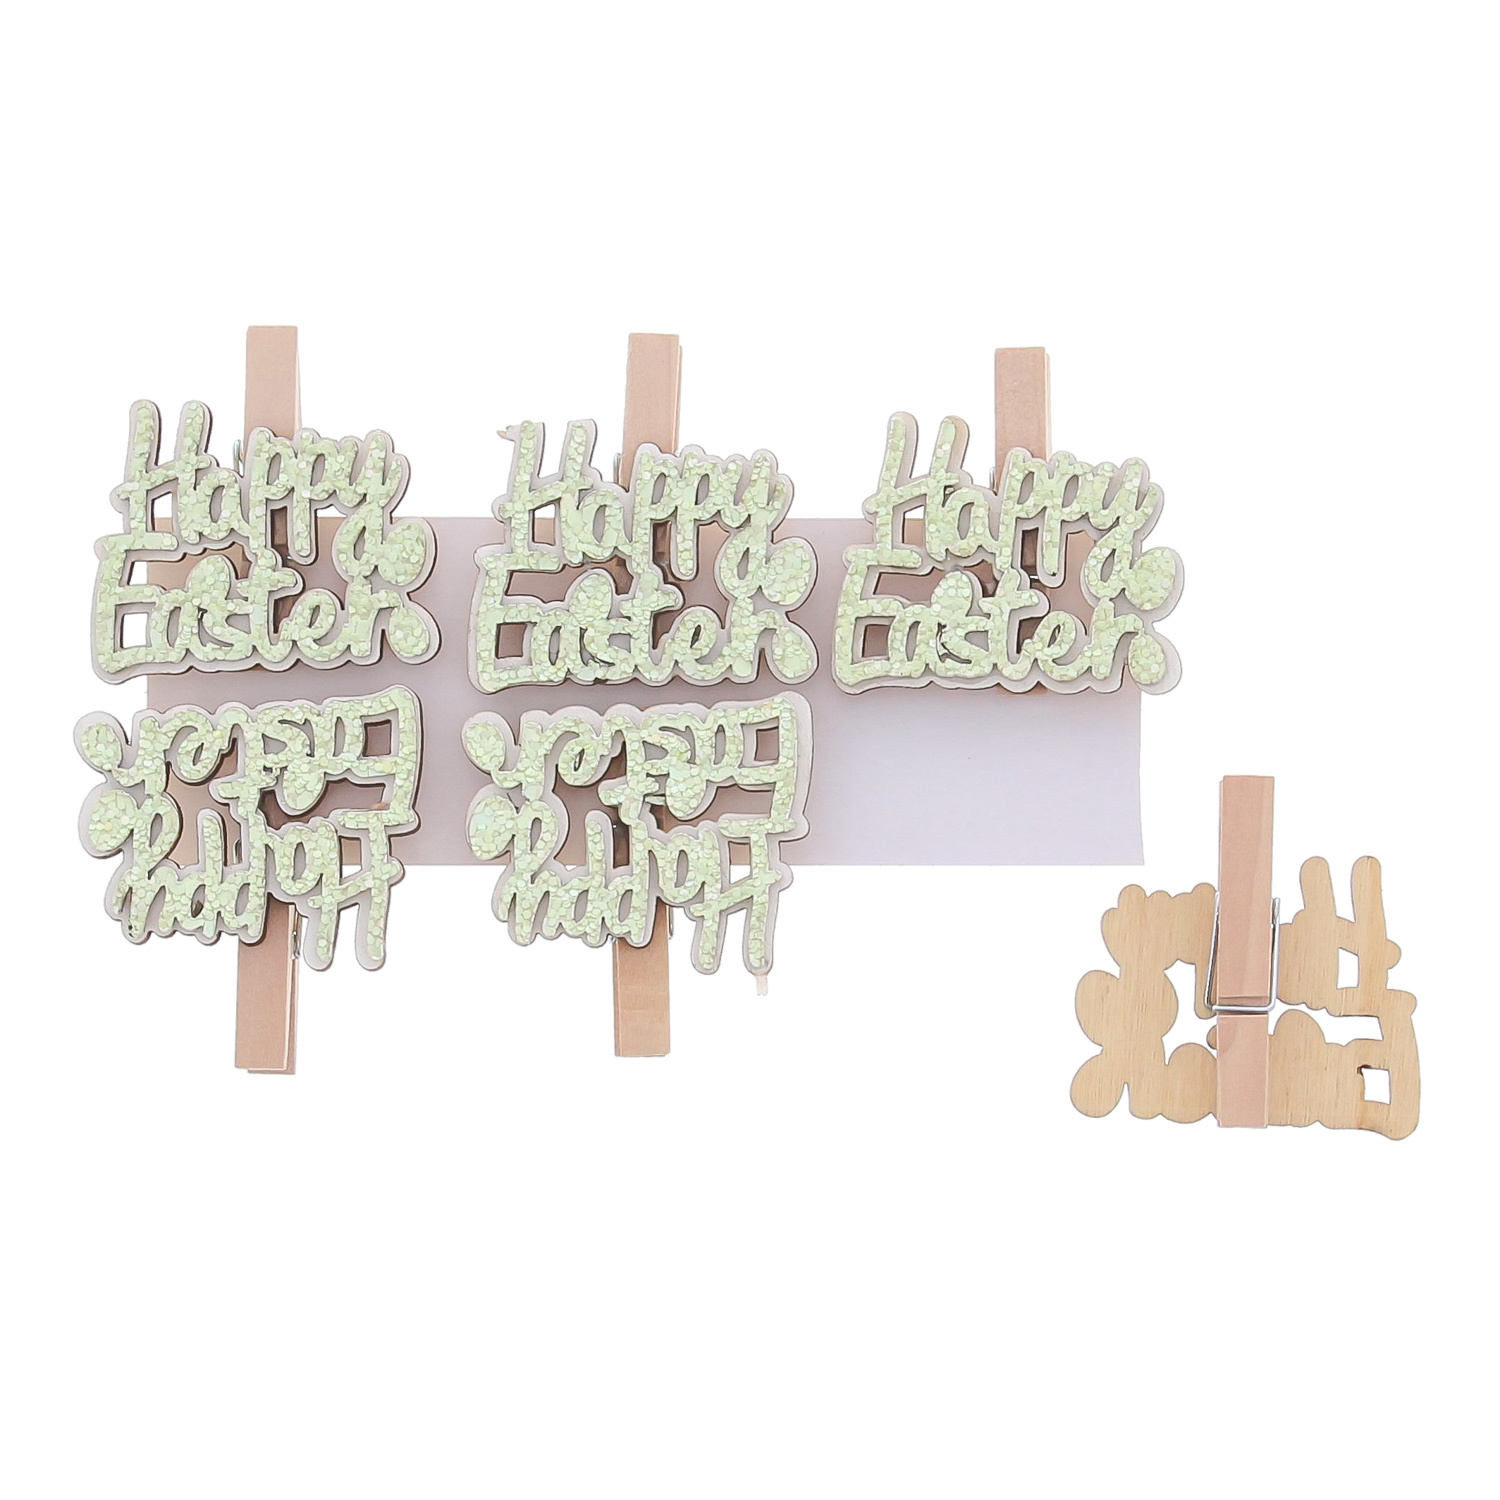 "Happy Easter" clip light green-  45*14*48mm- 36 pieces